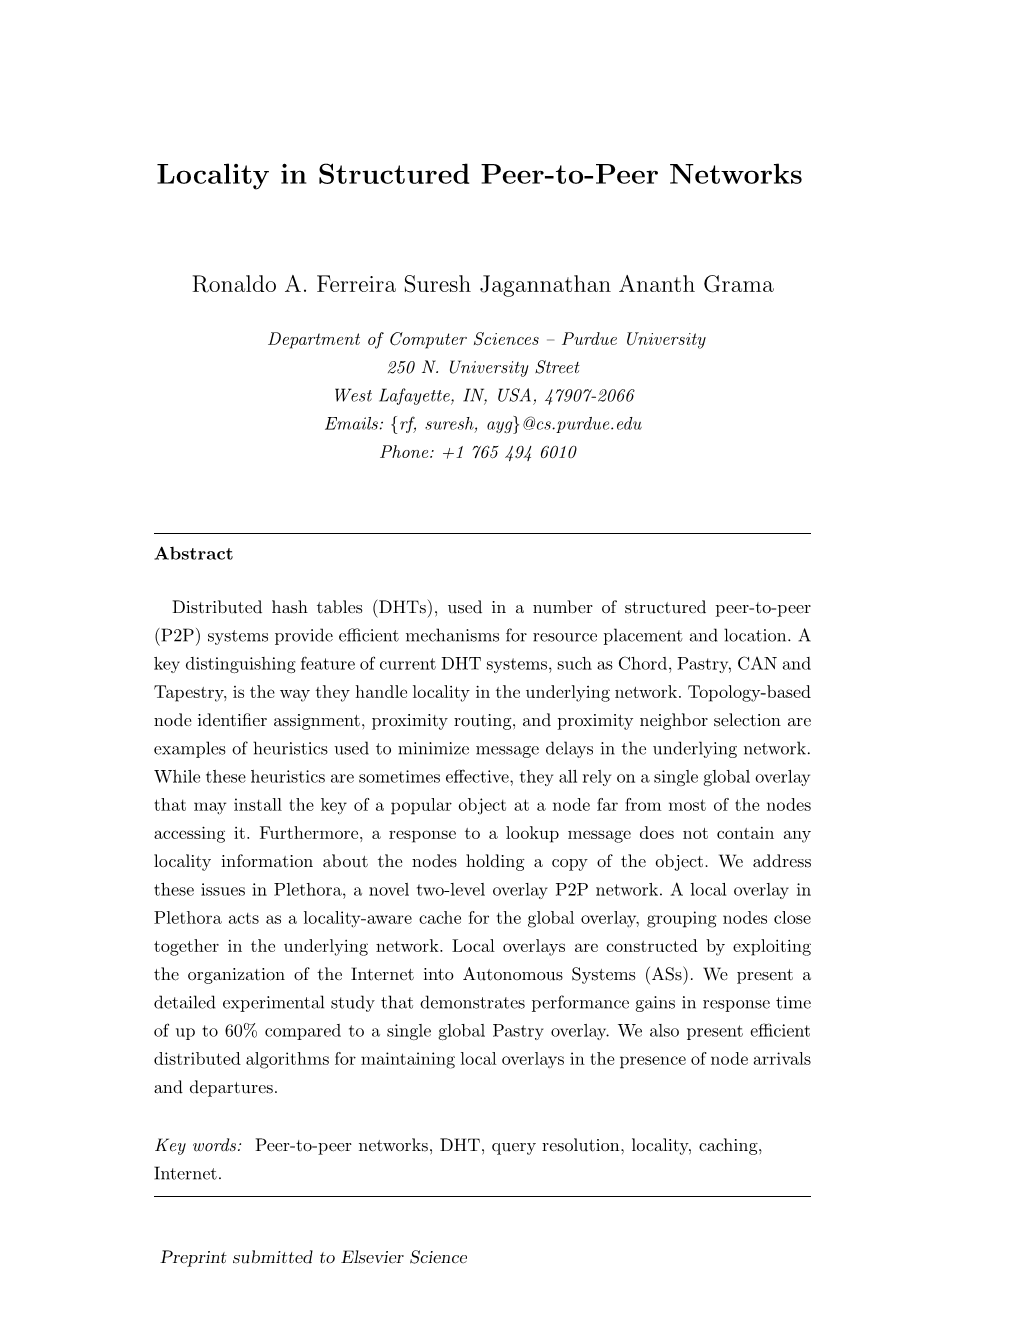 Locality in Structured Peer-To-Peer Networks